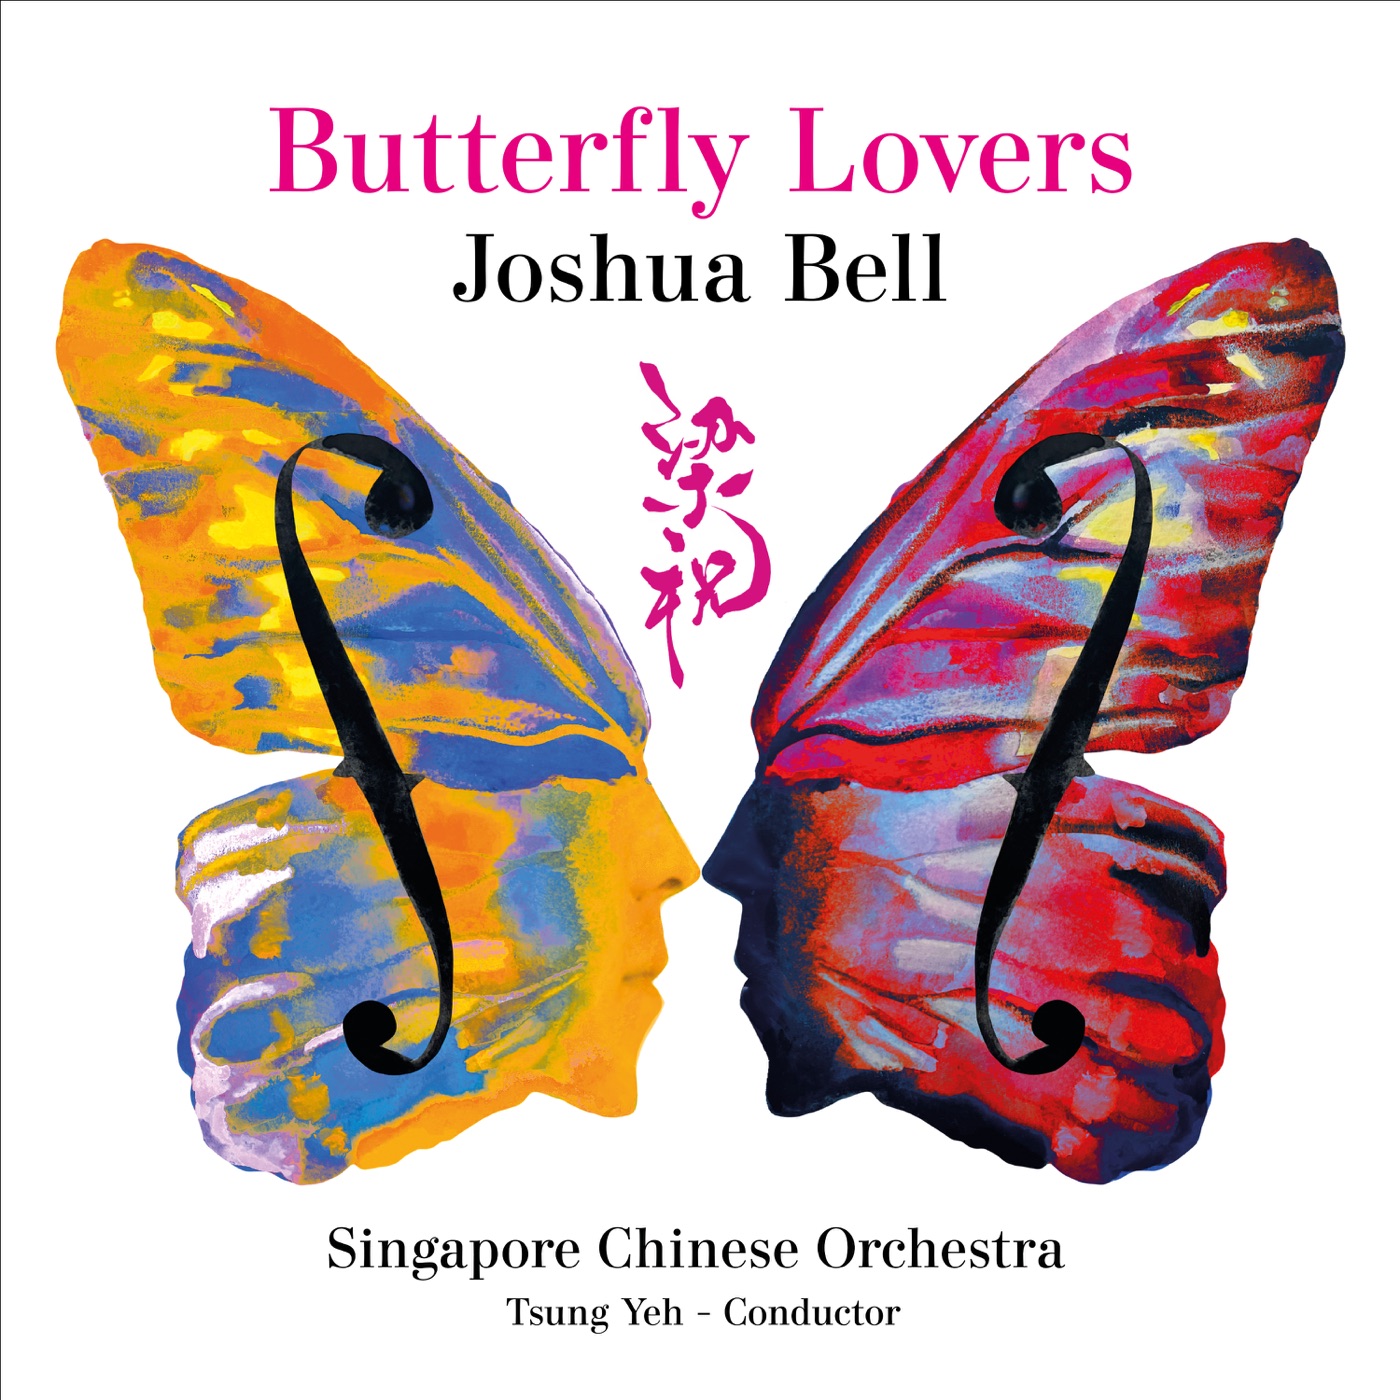 Butterfly Lovers Violin Concerto: II. Allegro by Joshua Bell, Tsung Yeh, Singapore Chinese Orchestra, Chen Gang, Zhanhao He